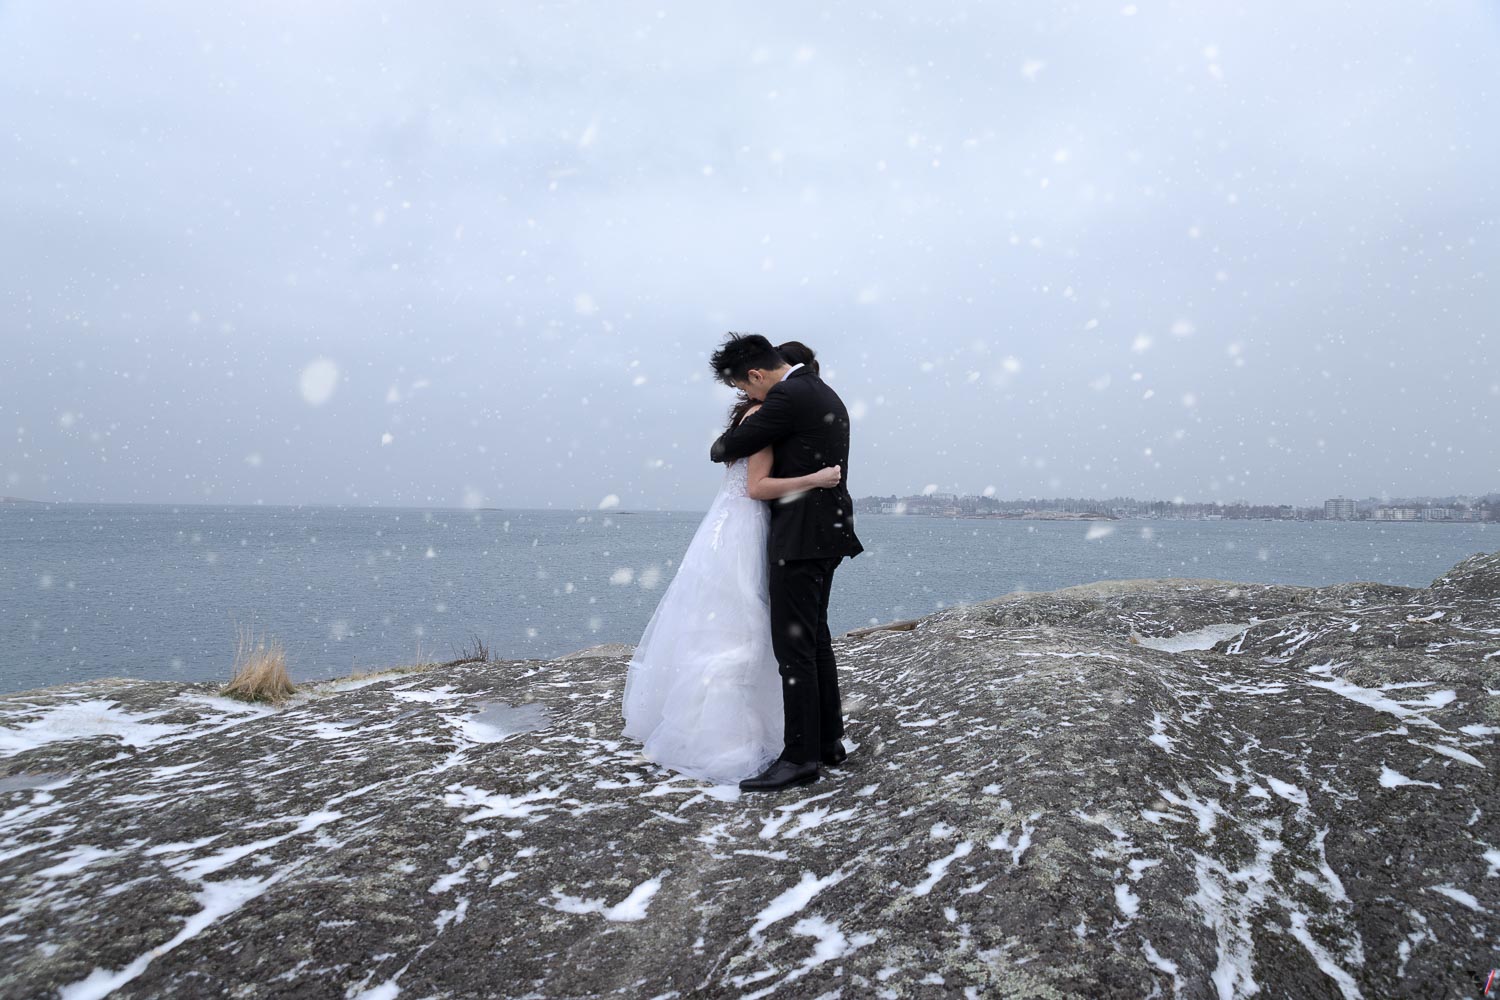 Snowing day at the beach in Victoria for a pre-wedding session